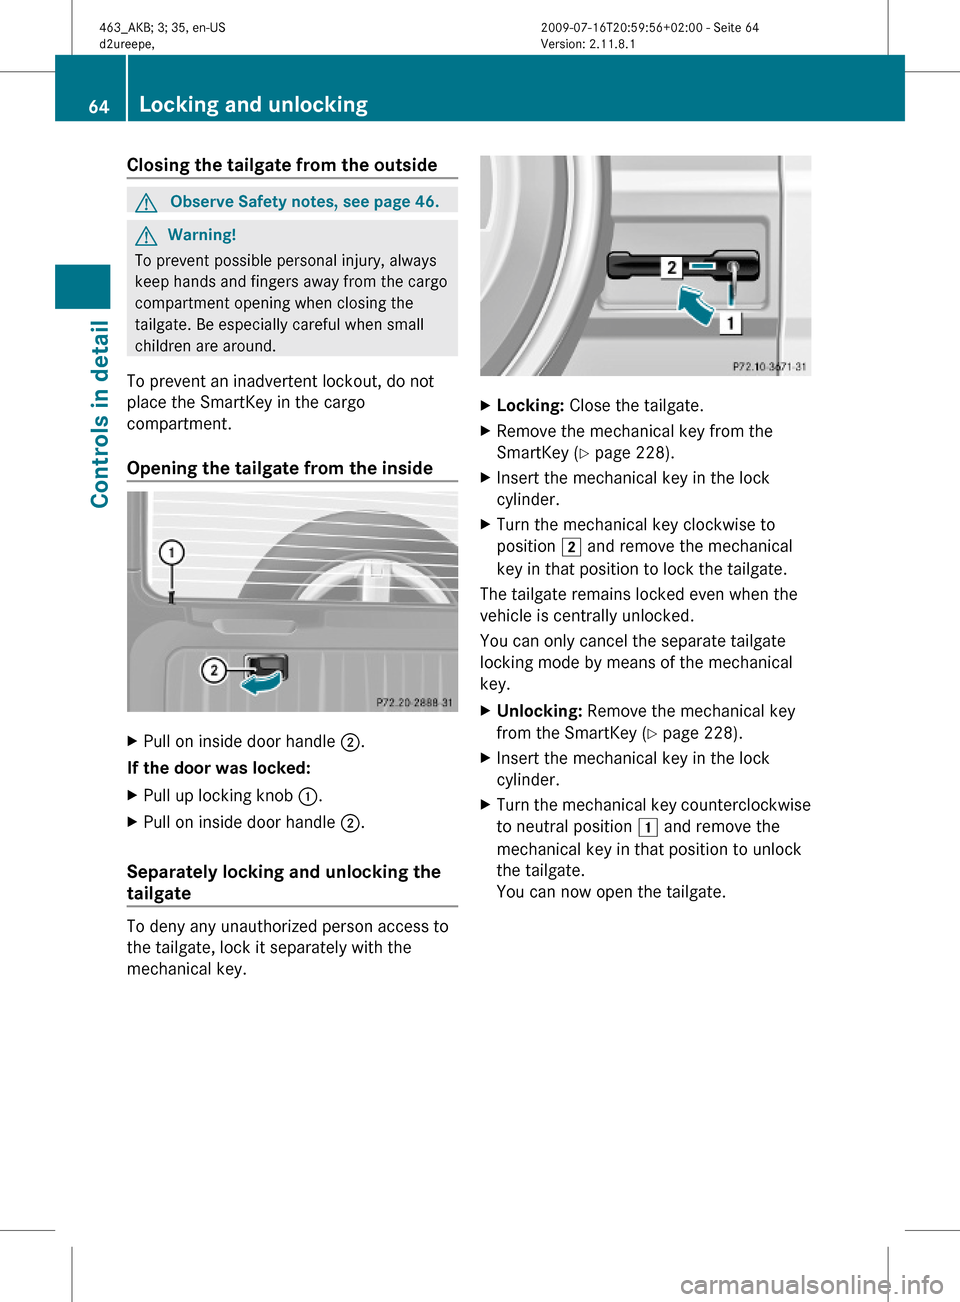 MERCEDES-BENZ G55AMG 2010 W463 Owners Manual Closing the tailgate from the outsideGObserve Safety notes, see page 46.GWarning!
To prevent possible personal injury, always
keep hands and fingers away from the cargo
compartment opening when closin